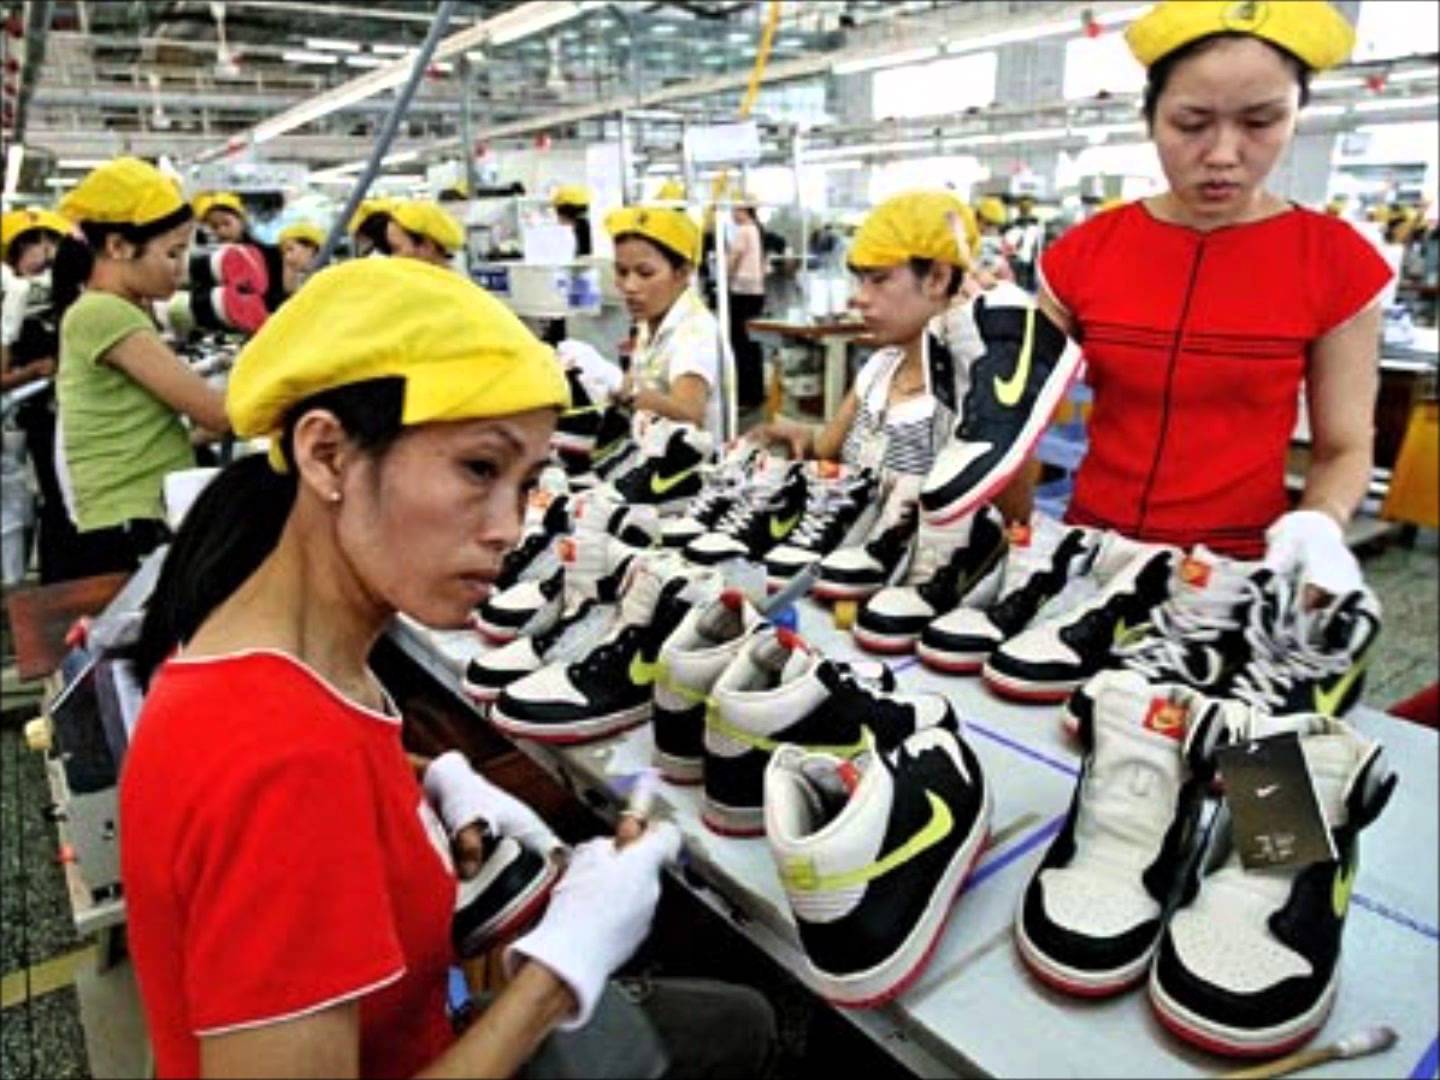 Over 65% of the slaves live in Asia, and work producing clothes.